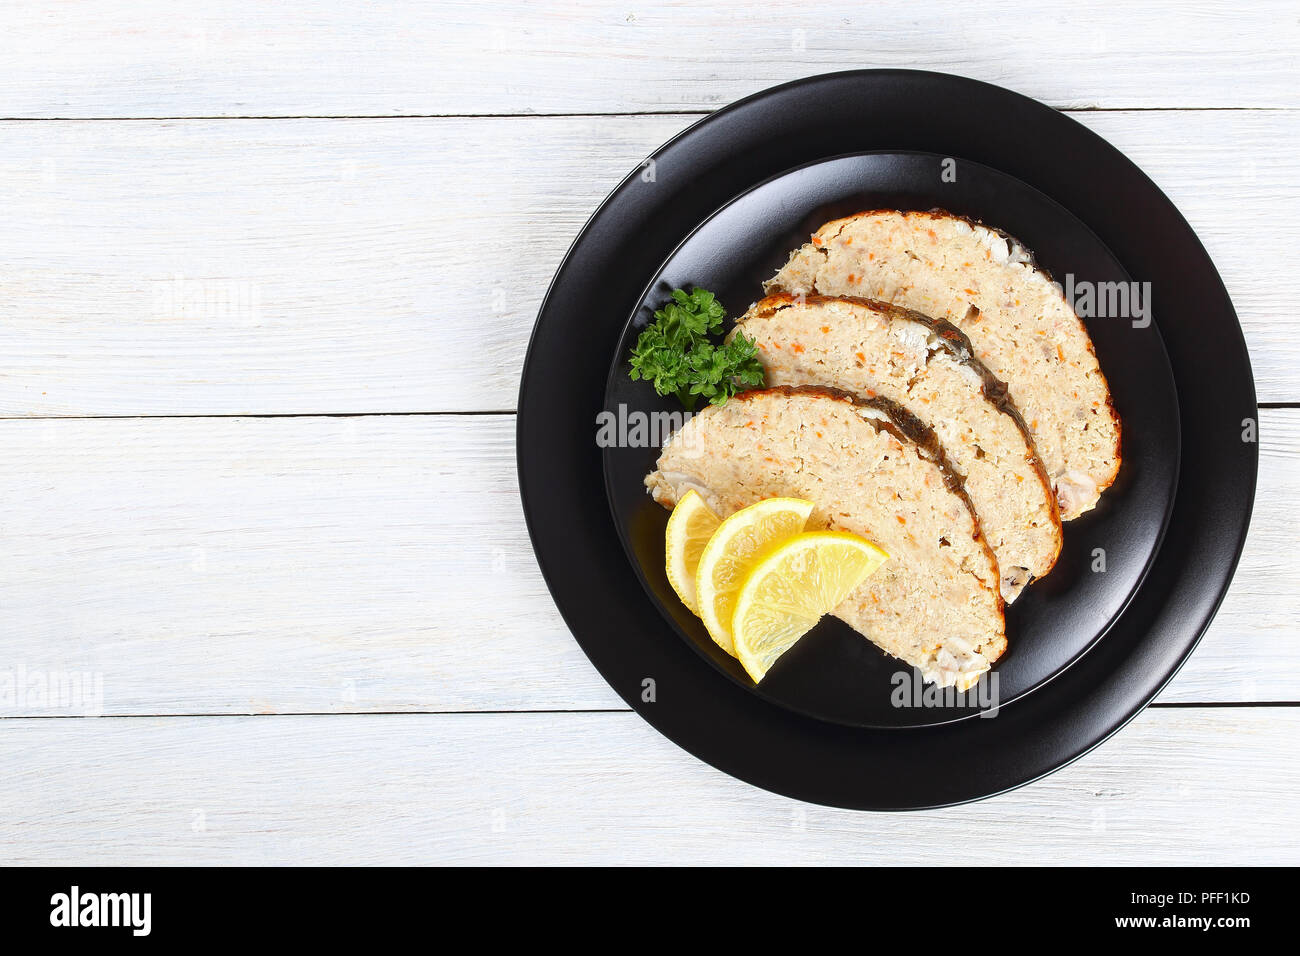 delicious baked in oven Gefilte minced carp fillets cut in slices with fresh parsley, lemon on black plate,  on white wooden table, view from above, c Stock Photo